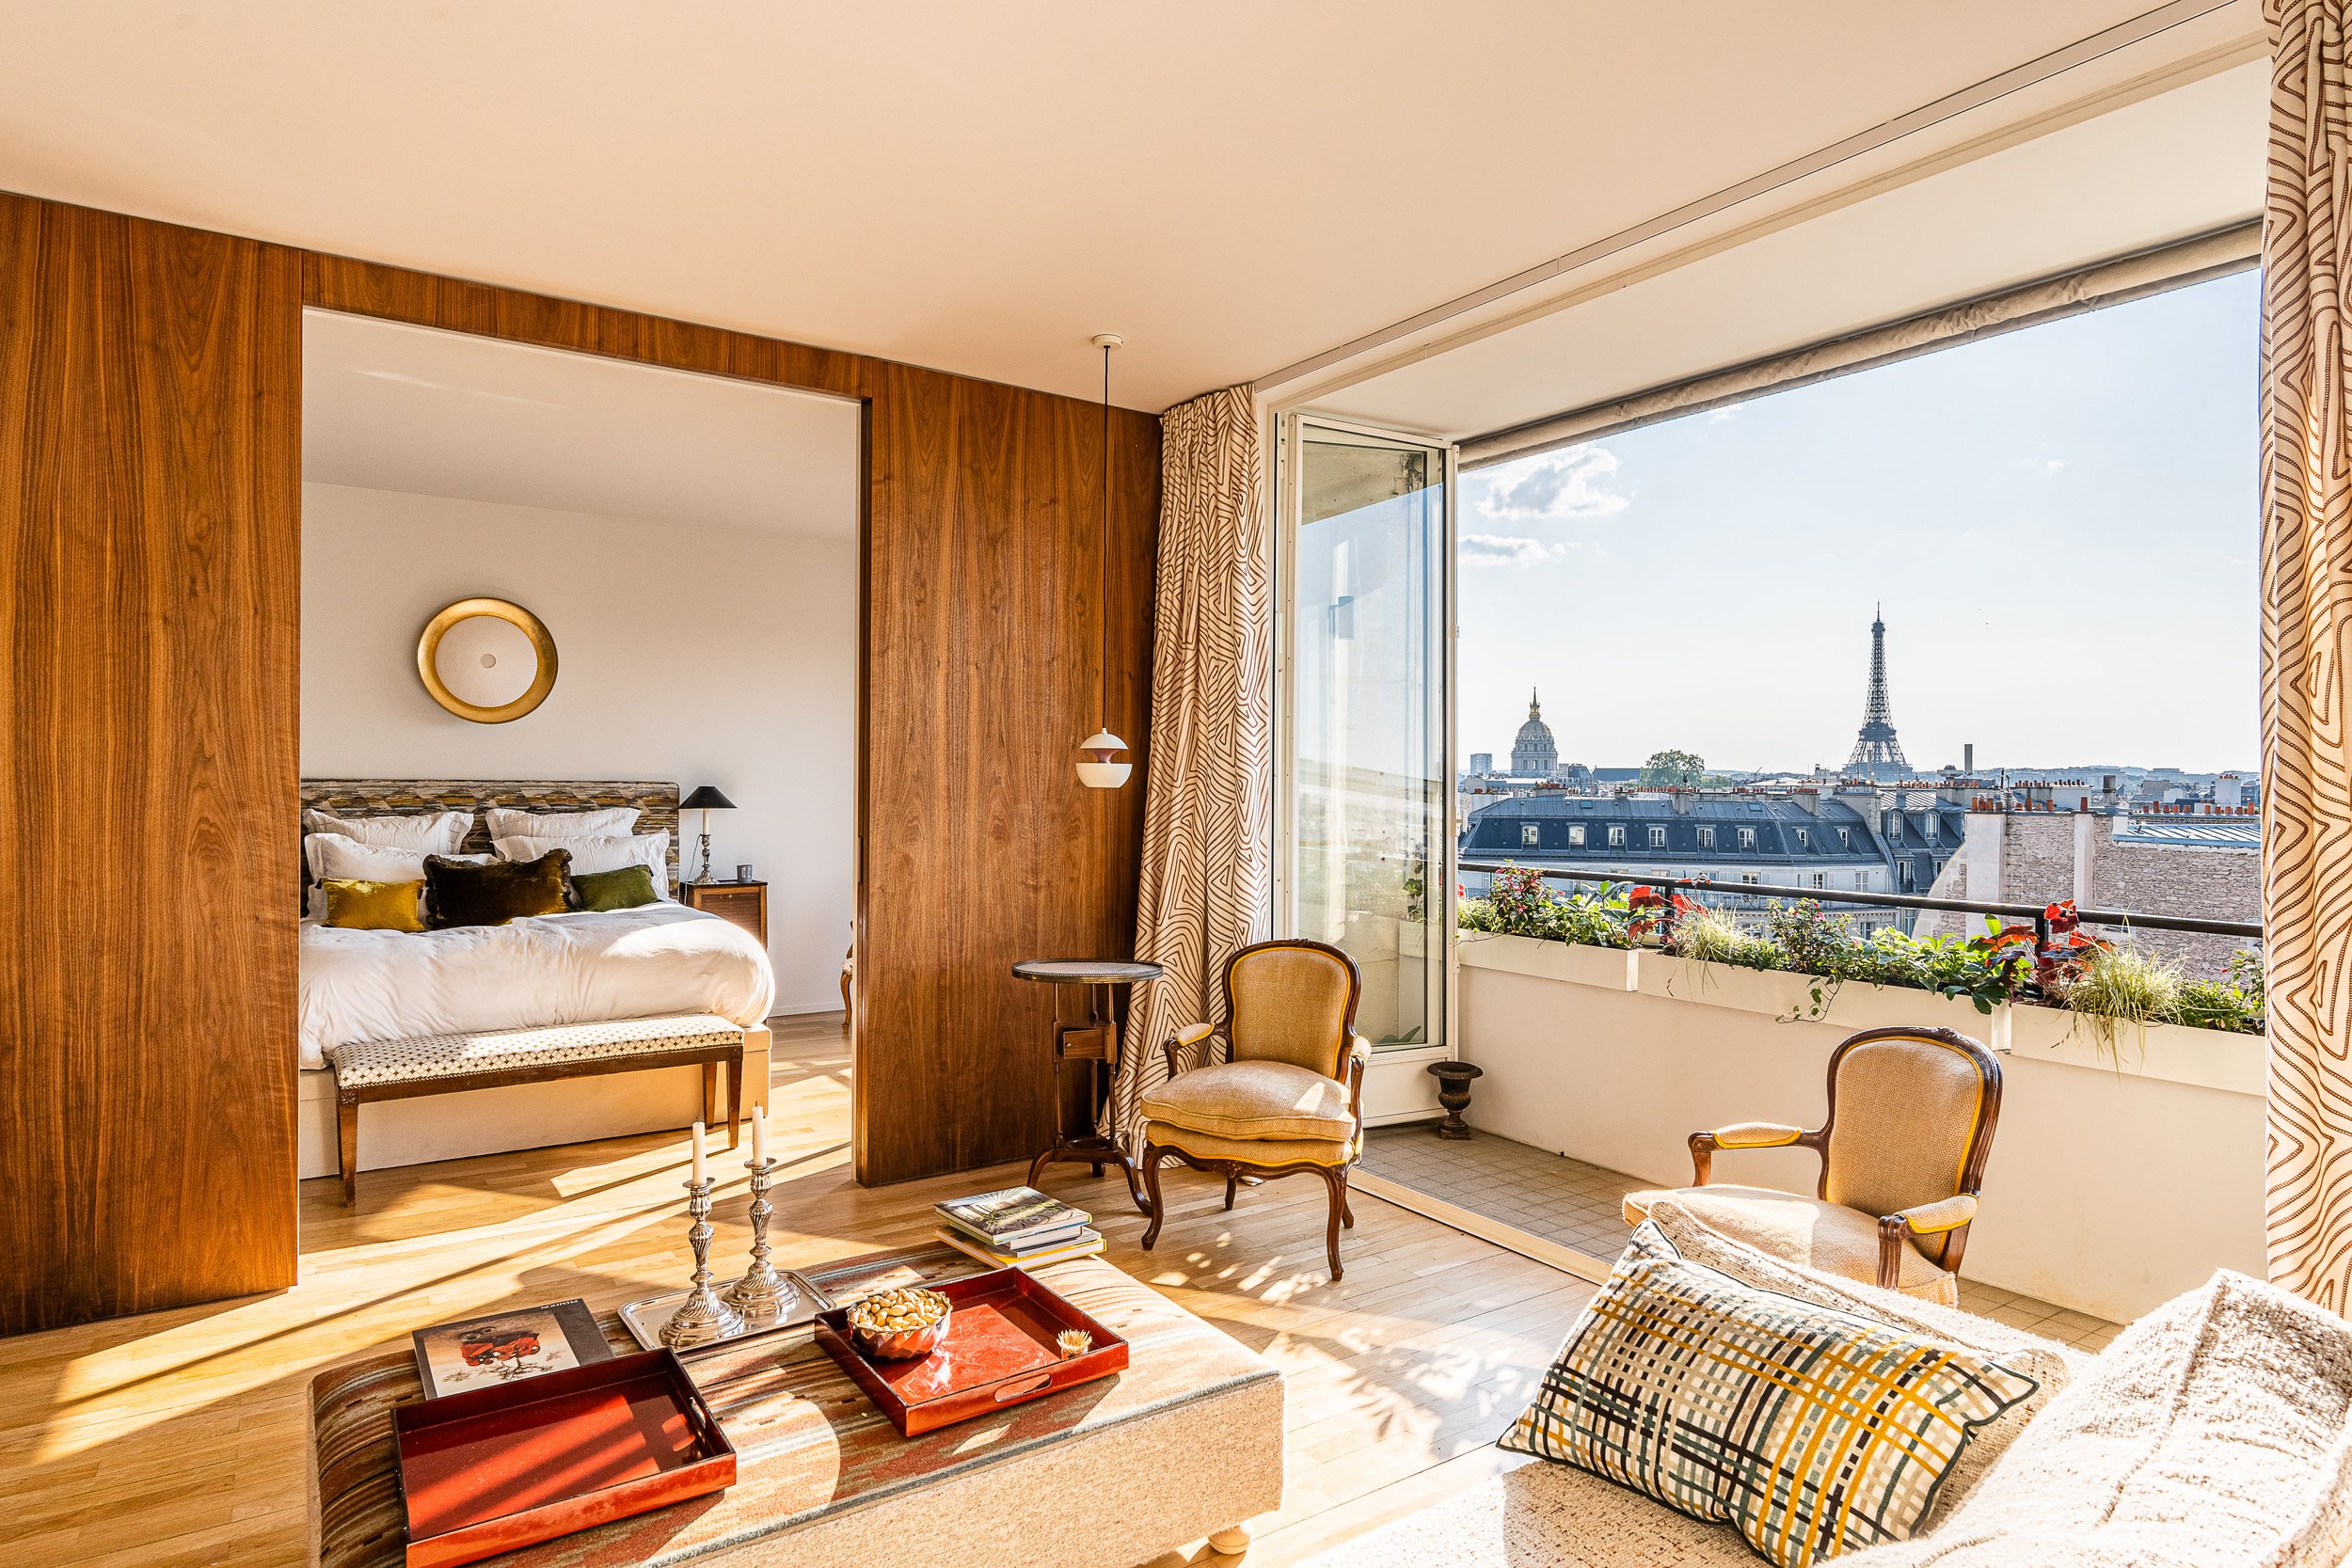 Luxury rooftop apartment in the heart of Paris and Saint Germain des Prés overlooking the Eiffel Tower